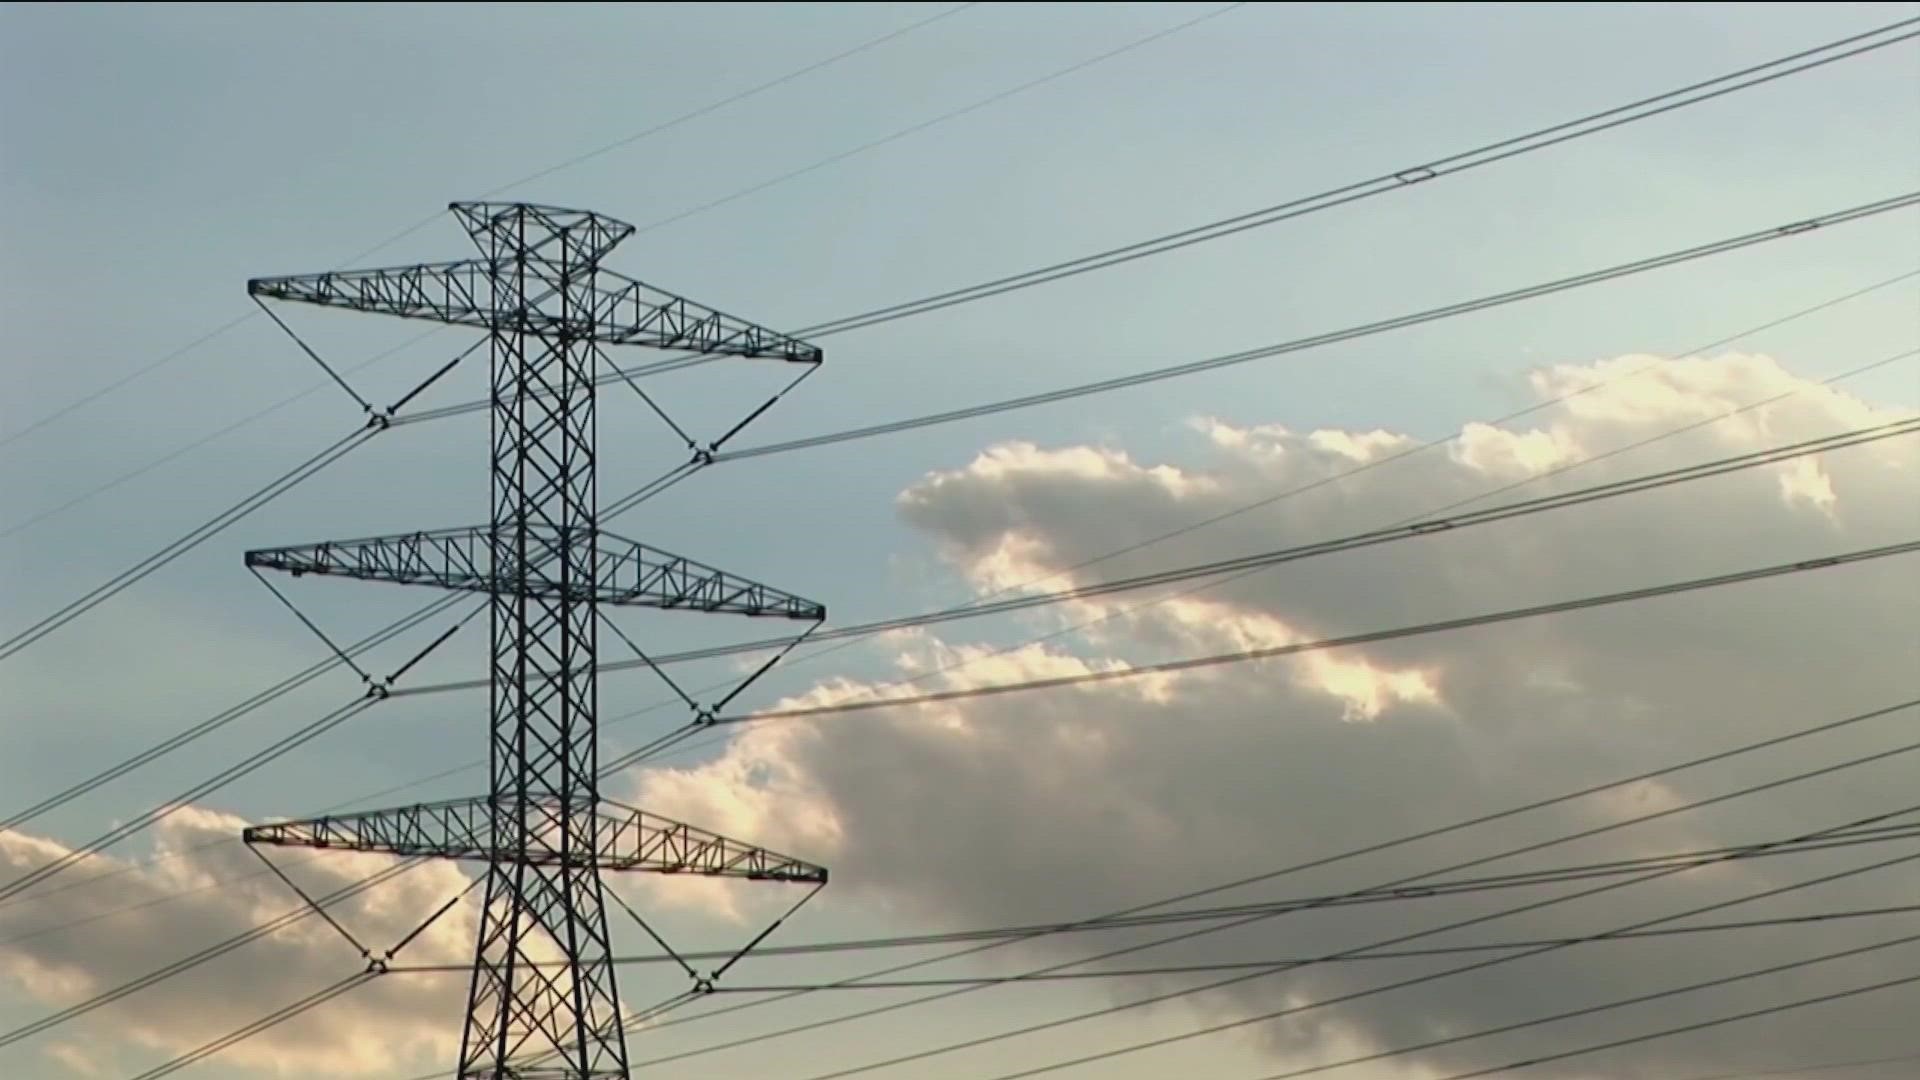 The energy provider is considering the increase because customers are reducing energy usage.